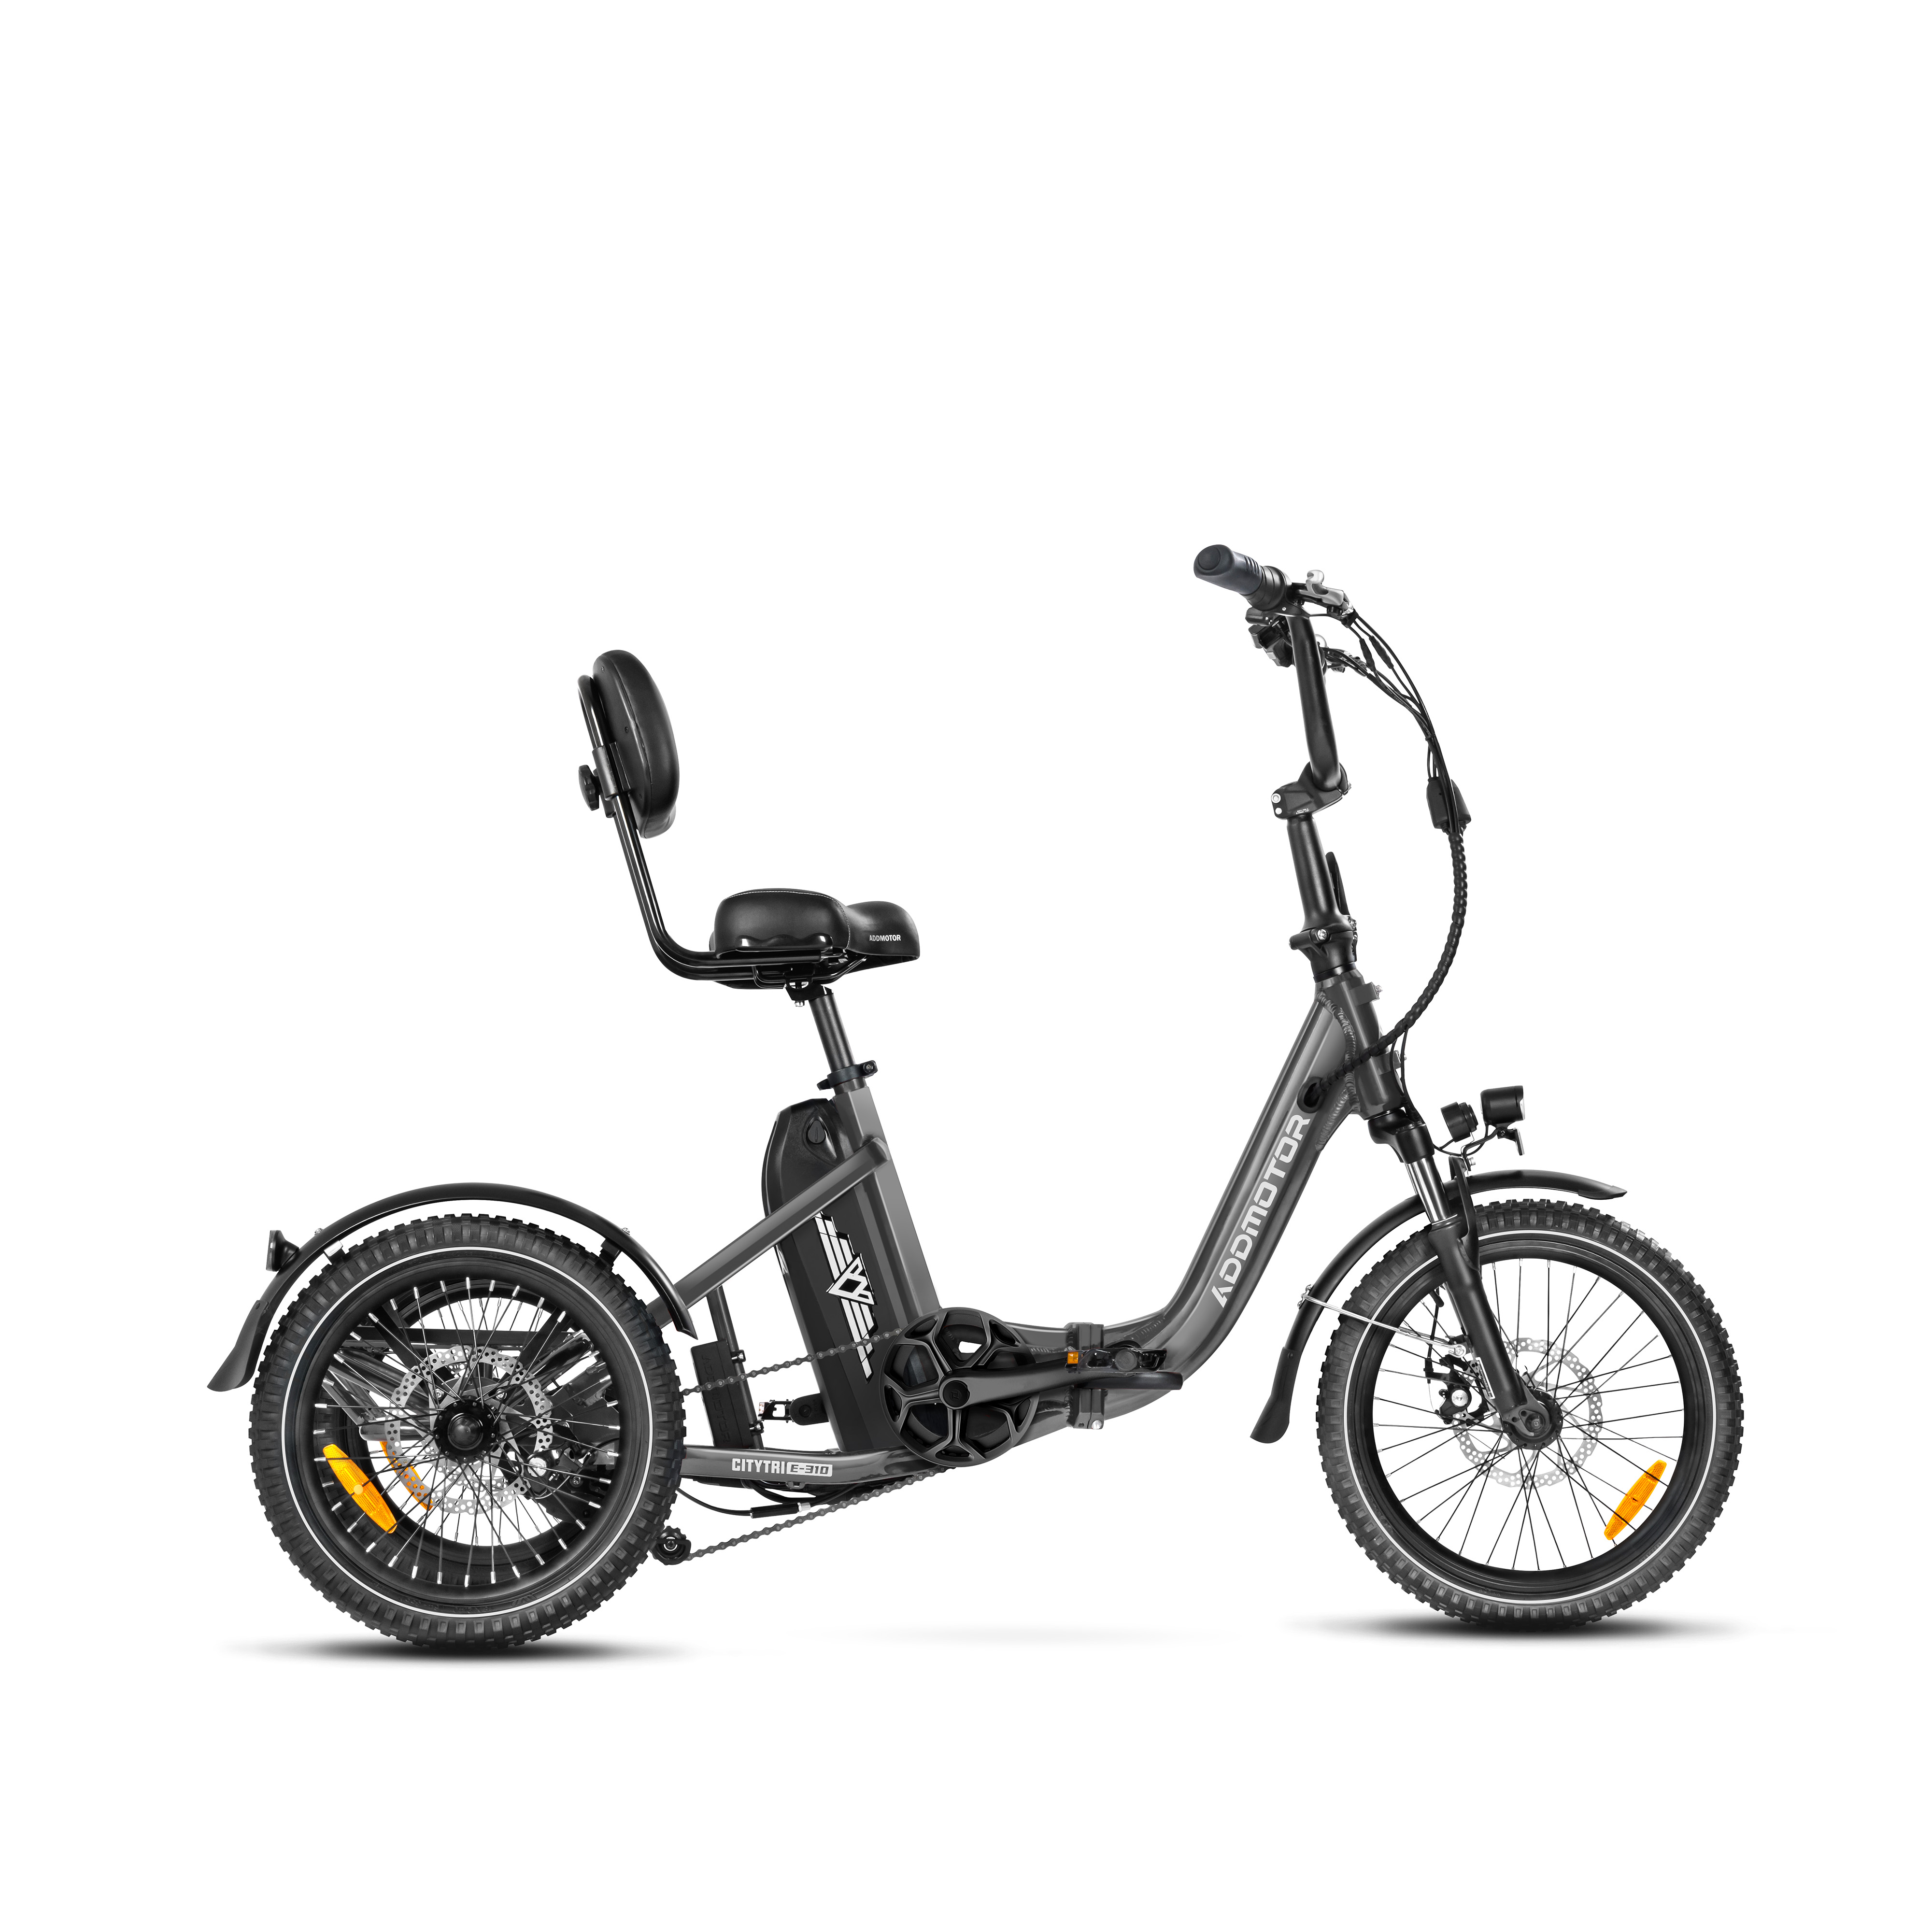 Addmotor Citytri E-310 Mini 750W 20Ah Electric Trike for Adults Best Electric Tricycle Under $2000, Up To 90 Miles - Grey